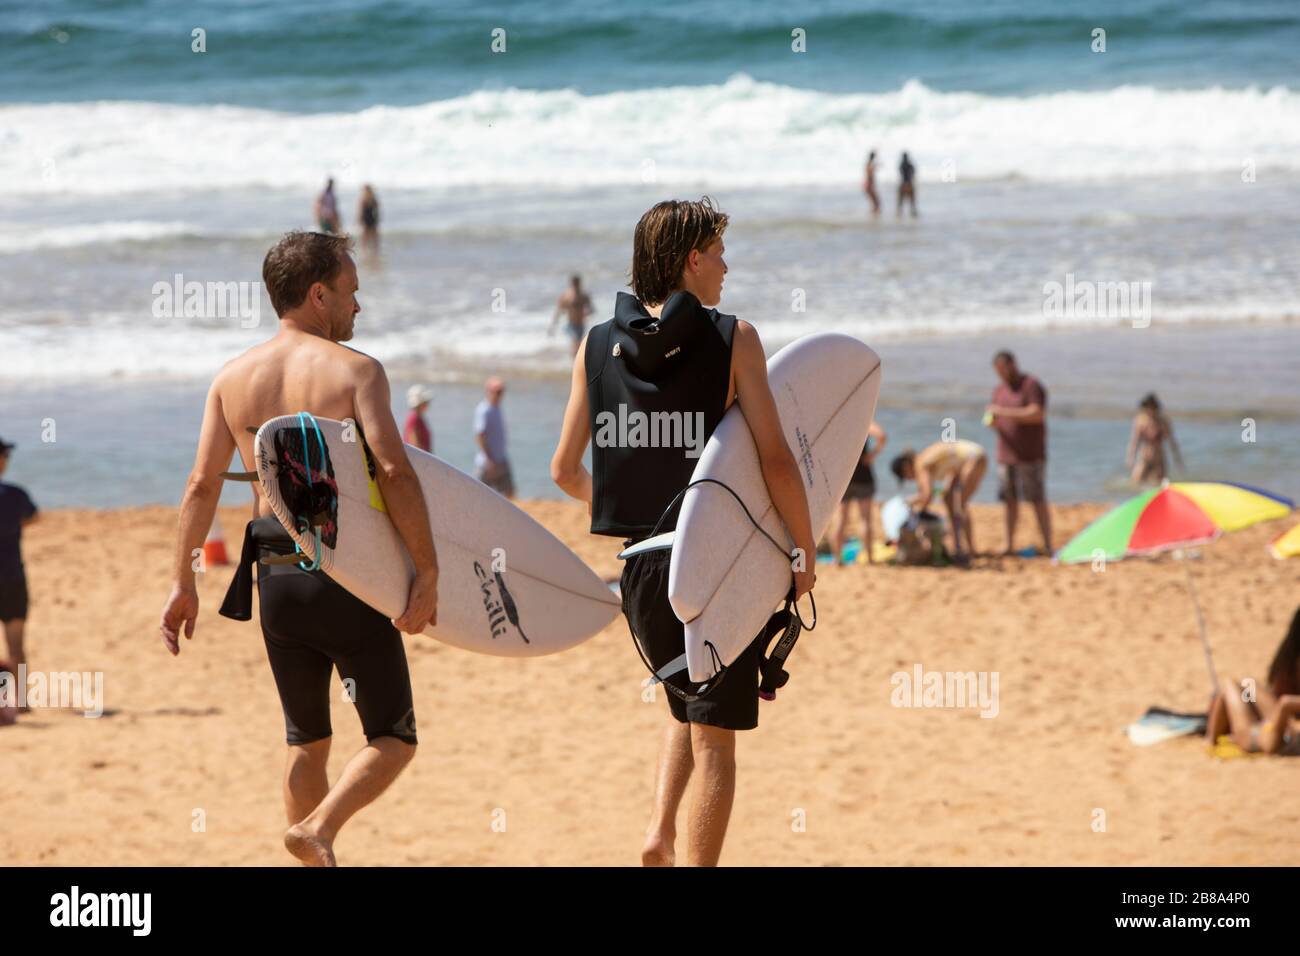 Sydney, Australia. 21st Mar, 2020. Avalon Beach,Sydney,Australia.Saturday 21st March 2020. Sydney residents heading for a surf not adhering to the warnings to stay 1.5m apart. Credit: martin berry/Alamy Live News Stock Photo